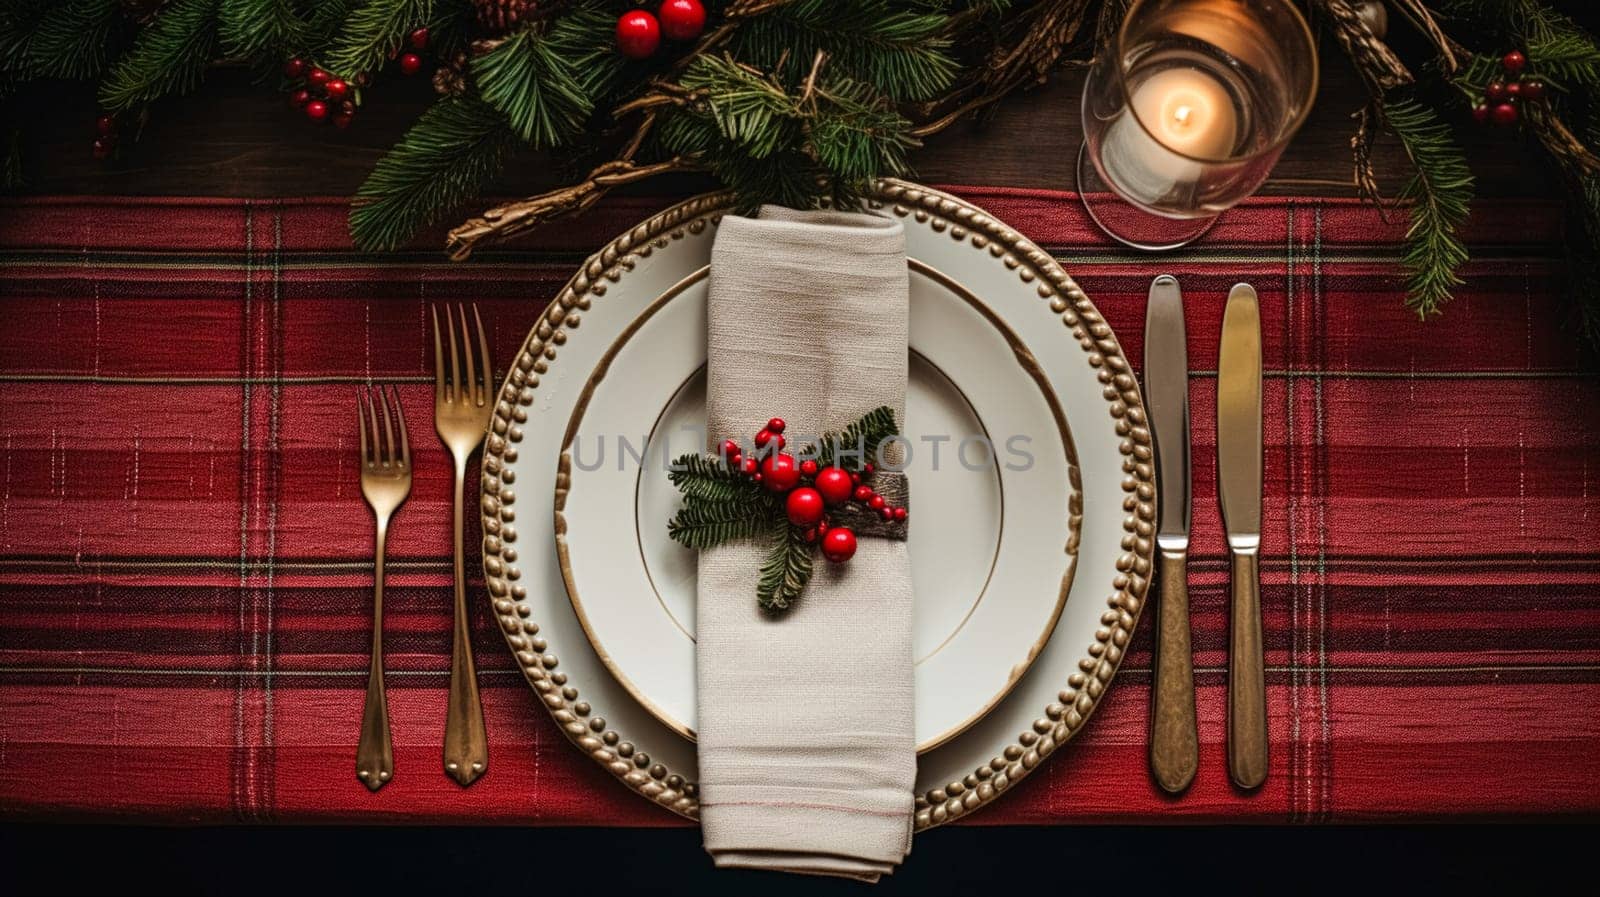 Christmas table decor, holiday tablescape and dinner table setting, formal event decoration for New Year, family celebration, English country and home styling inspiration